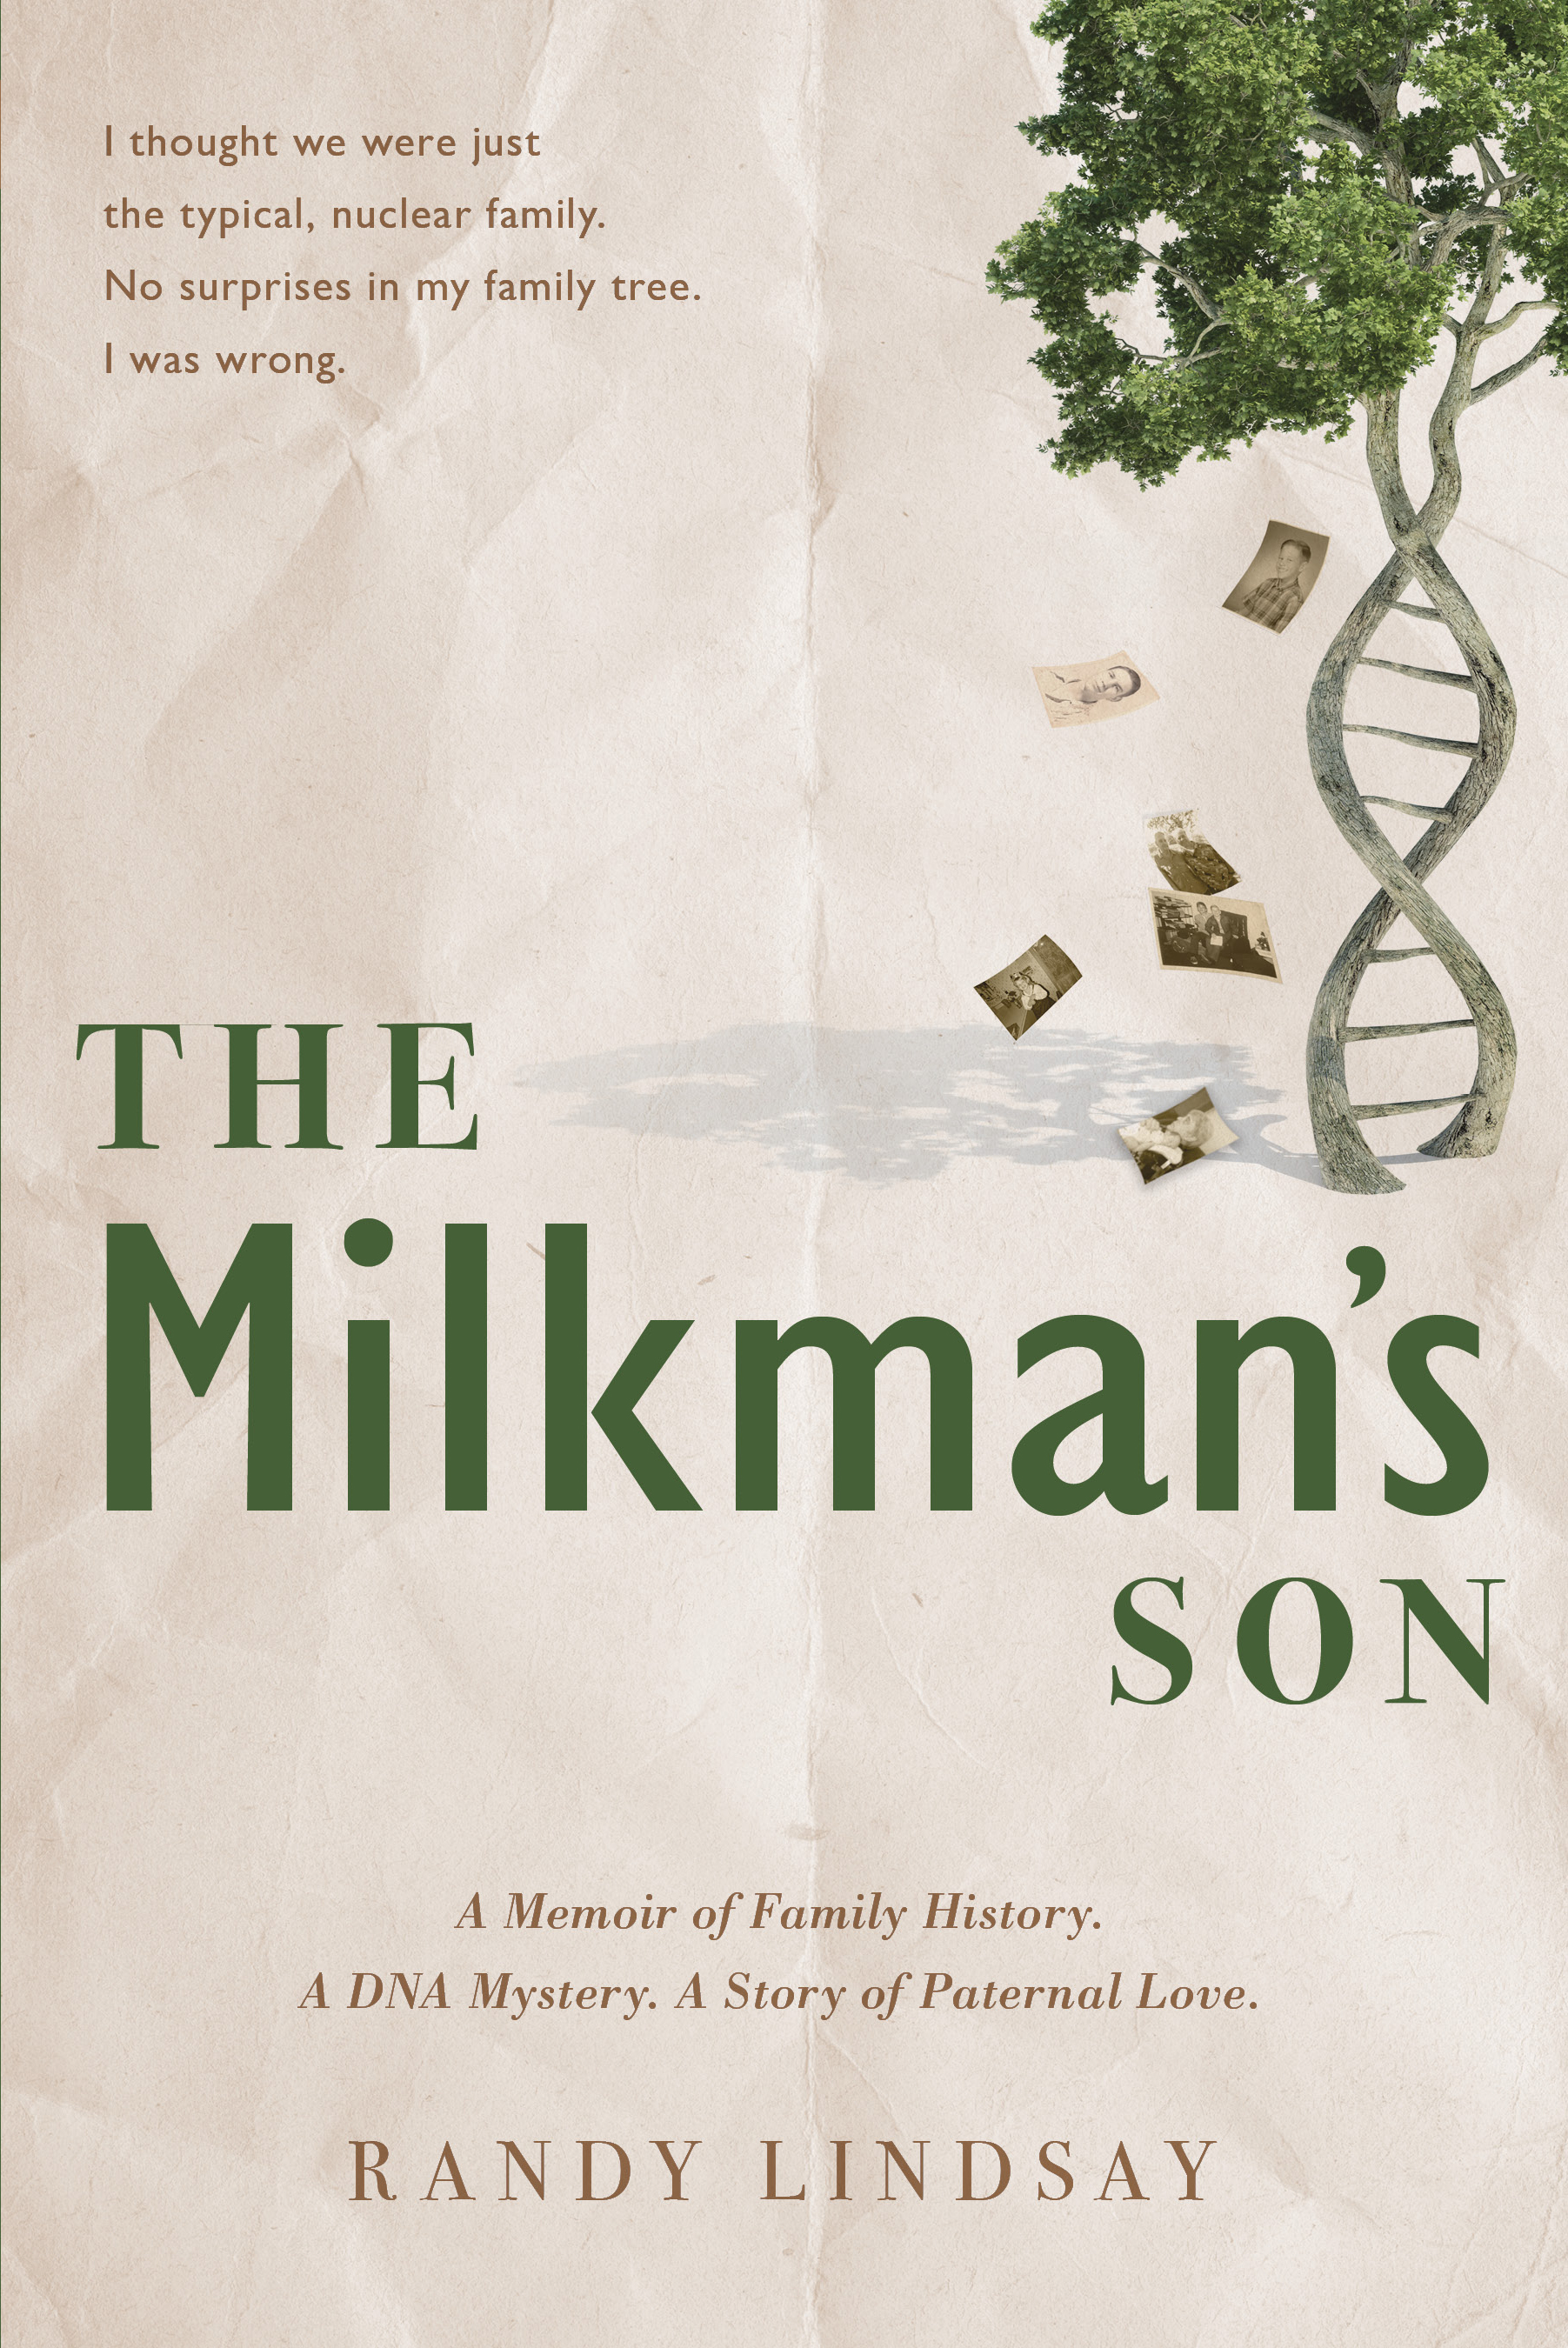 The Milkman's Son A Memoir of Family History. A DNA Mystery. A Story of Paternal Love cover image